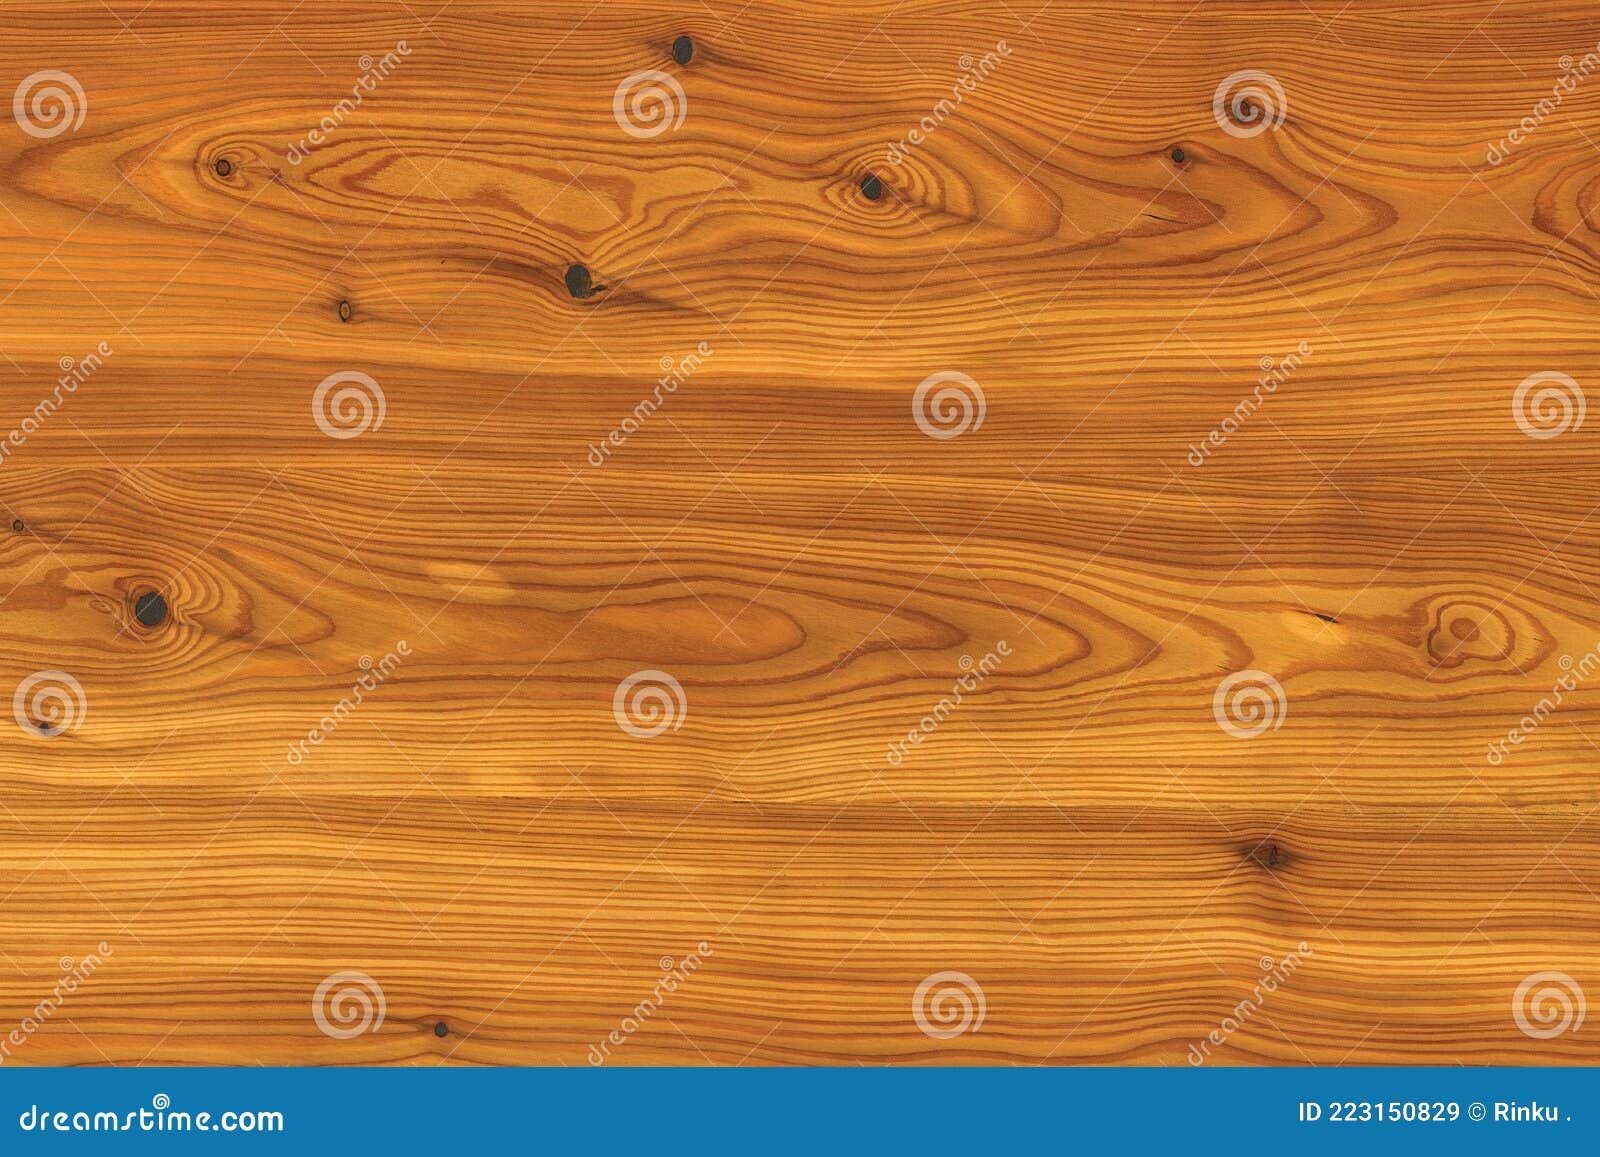 Brown Wooden Texture. Surface of Teak Wood Background Use for Design and  Decoration Stock Image - Image of wood, hardwood: 223150829